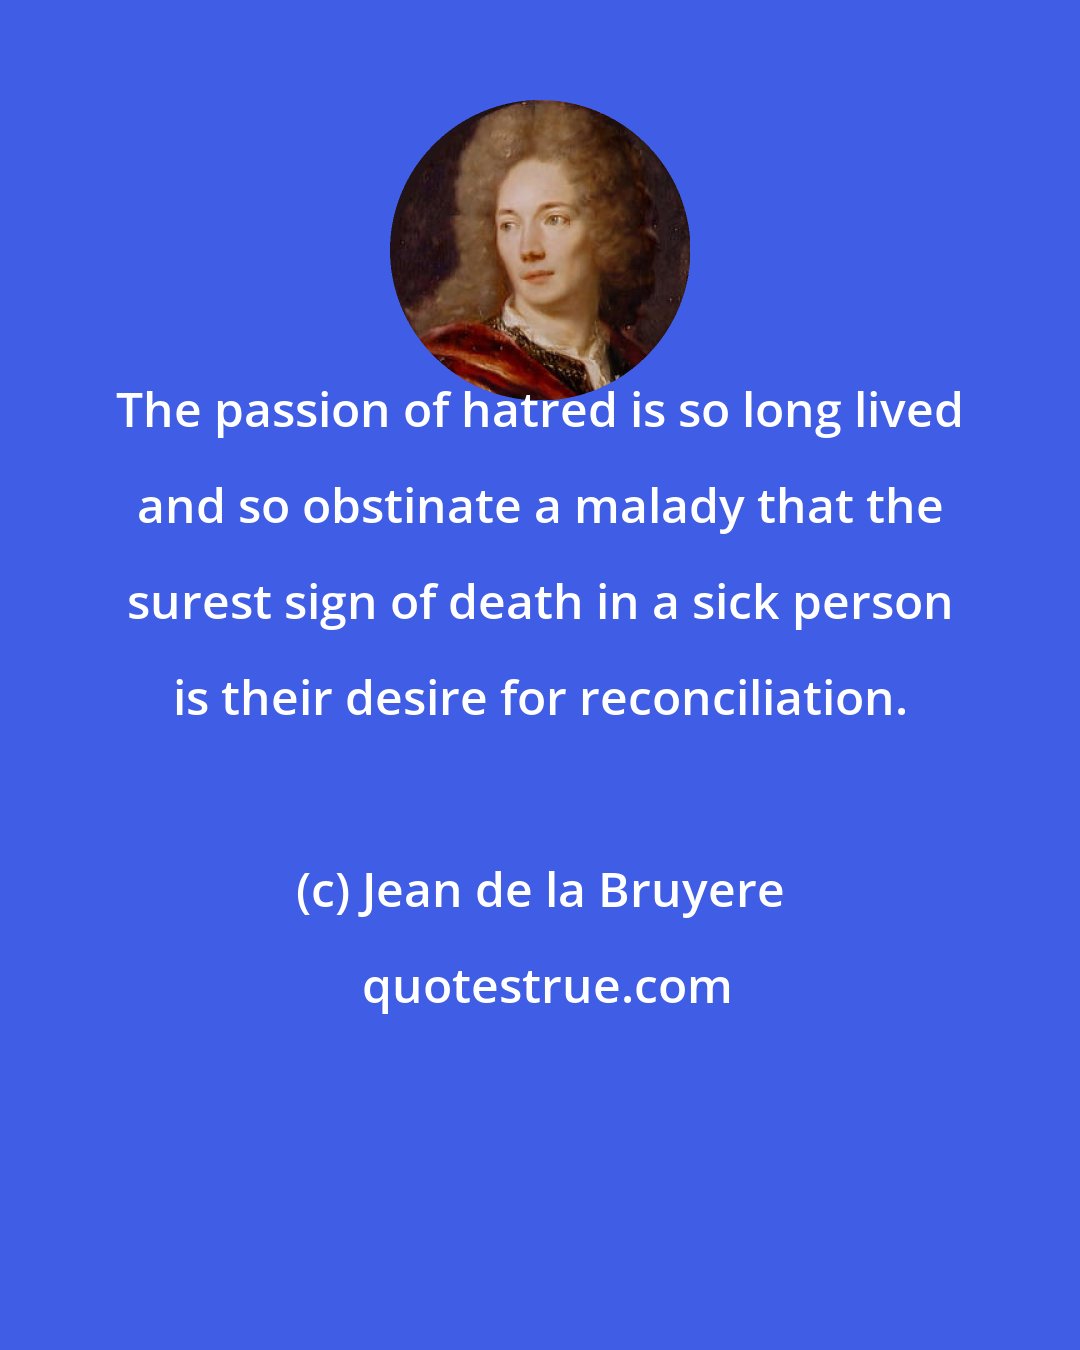 Jean de la Bruyere: The passion of hatred is so long lived and so obstinate a malady that the surest sign of death in a sick person is their desire for reconciliation.